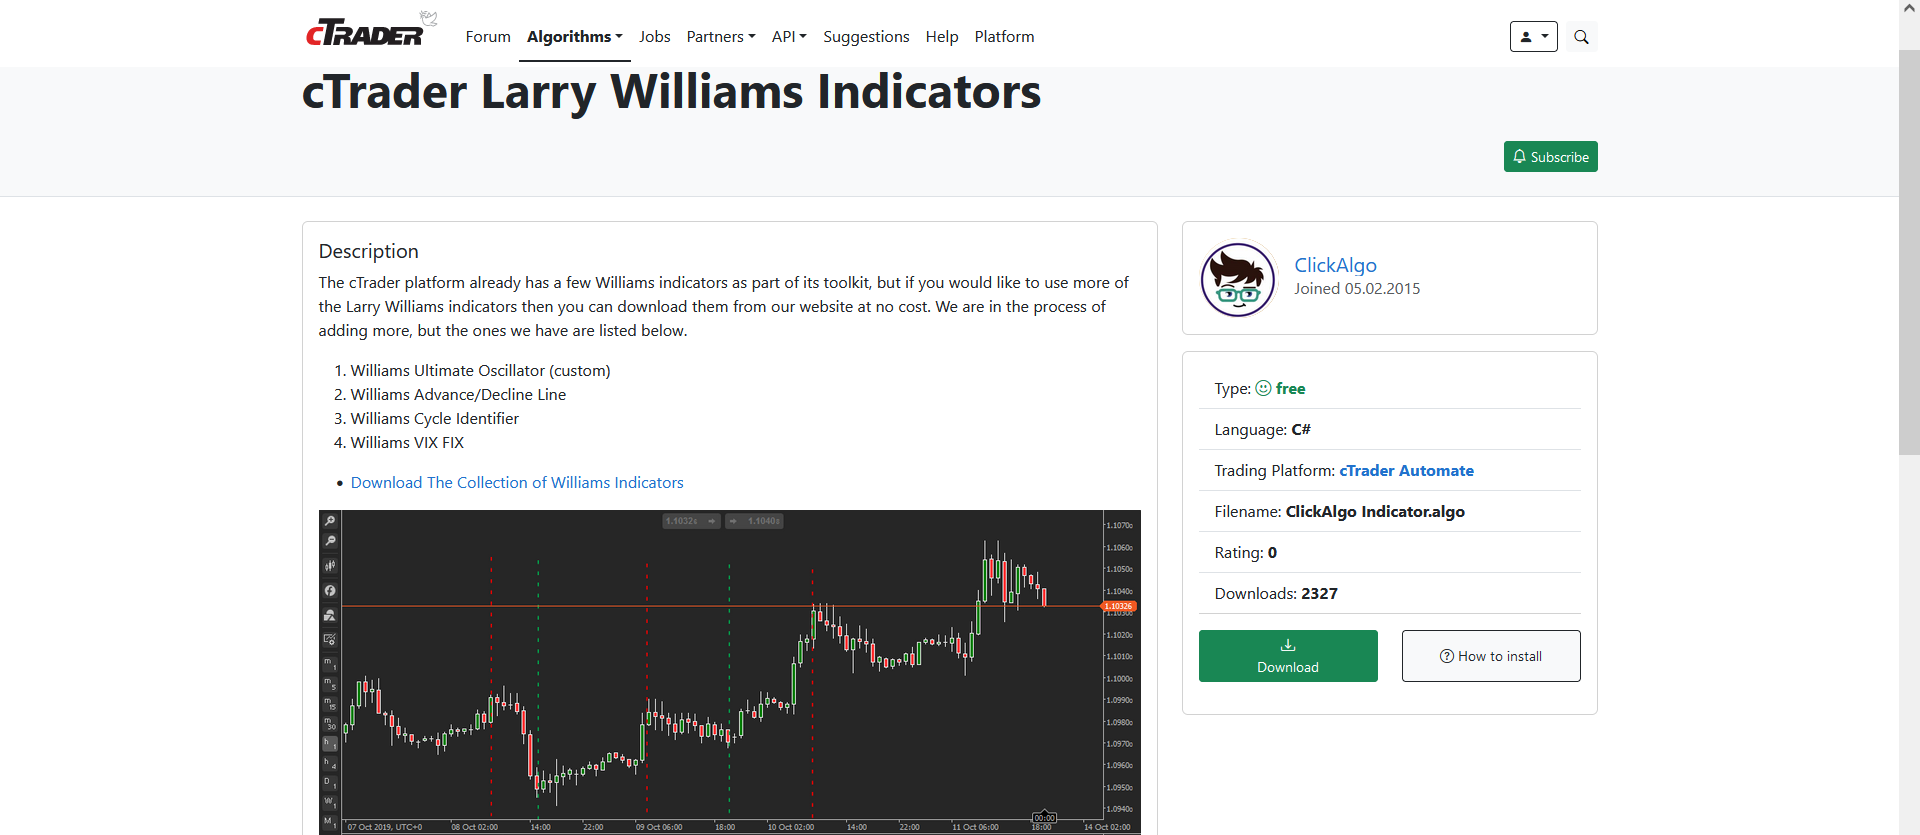 Larry Williams Indicator Package